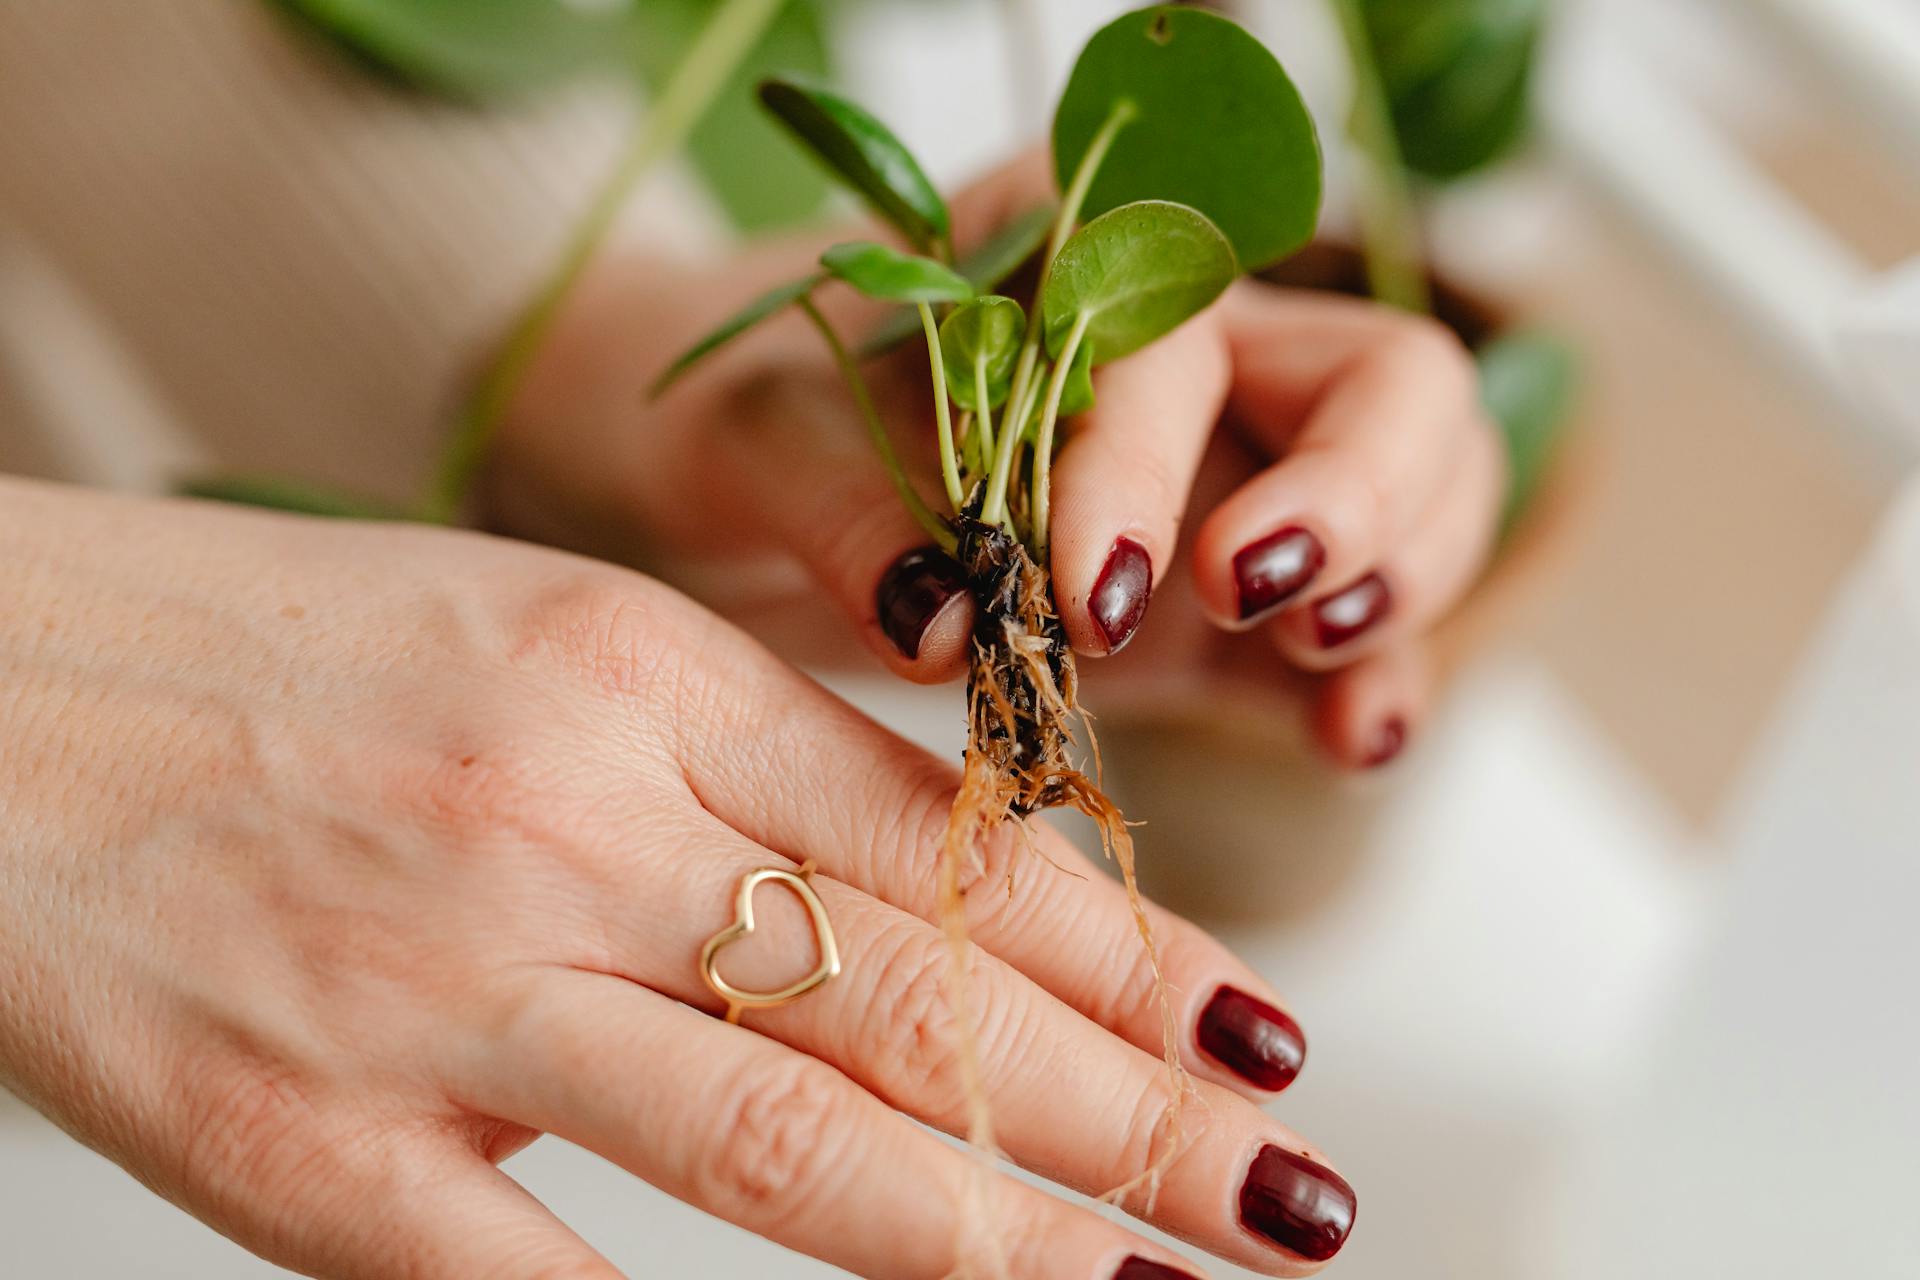 A person holding a seedling | Source: Pexels